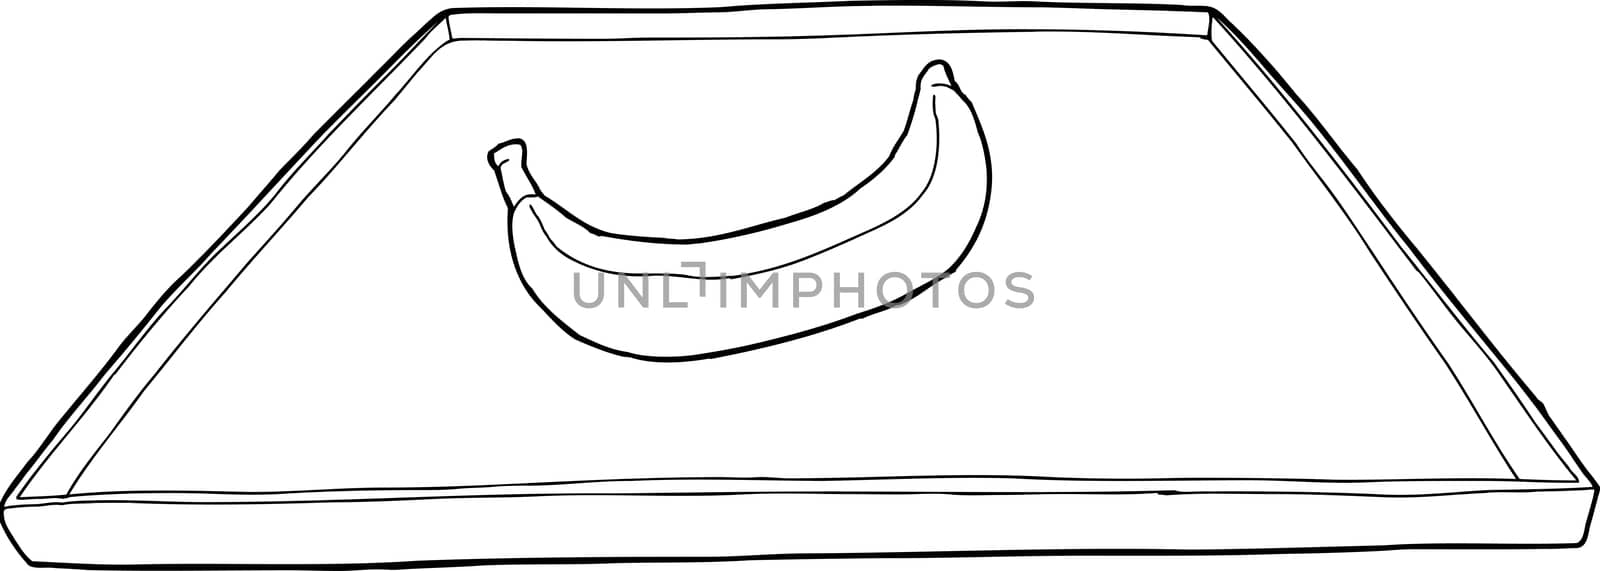 Outline of Banana on Tray by TheBlackRhino